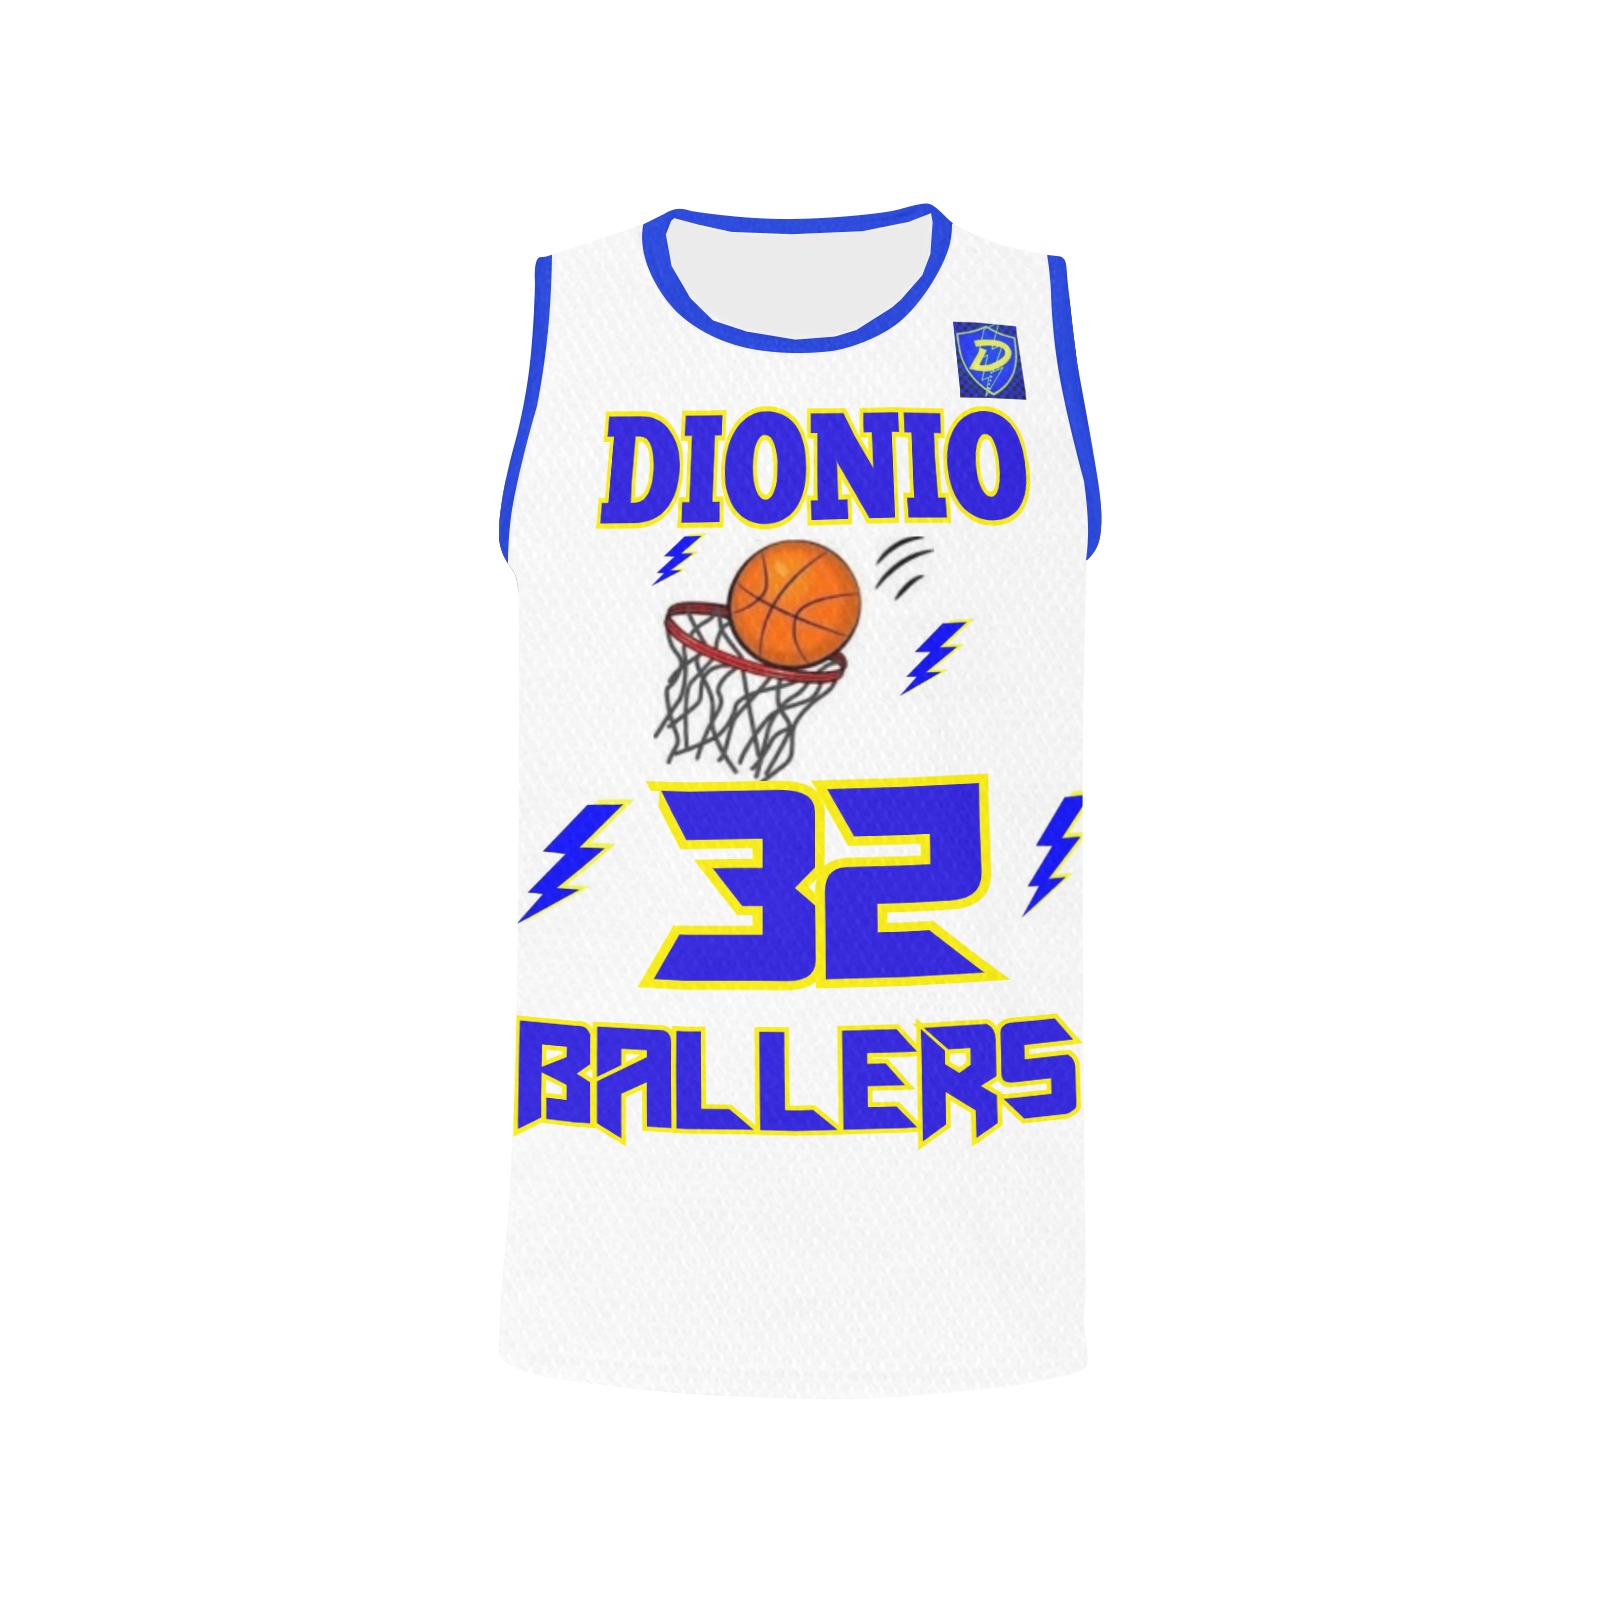 DIONIO Clothing - Dionio Ballers Basketball Jersey #32 (White & Blue) All Over Print Basketball Jersey